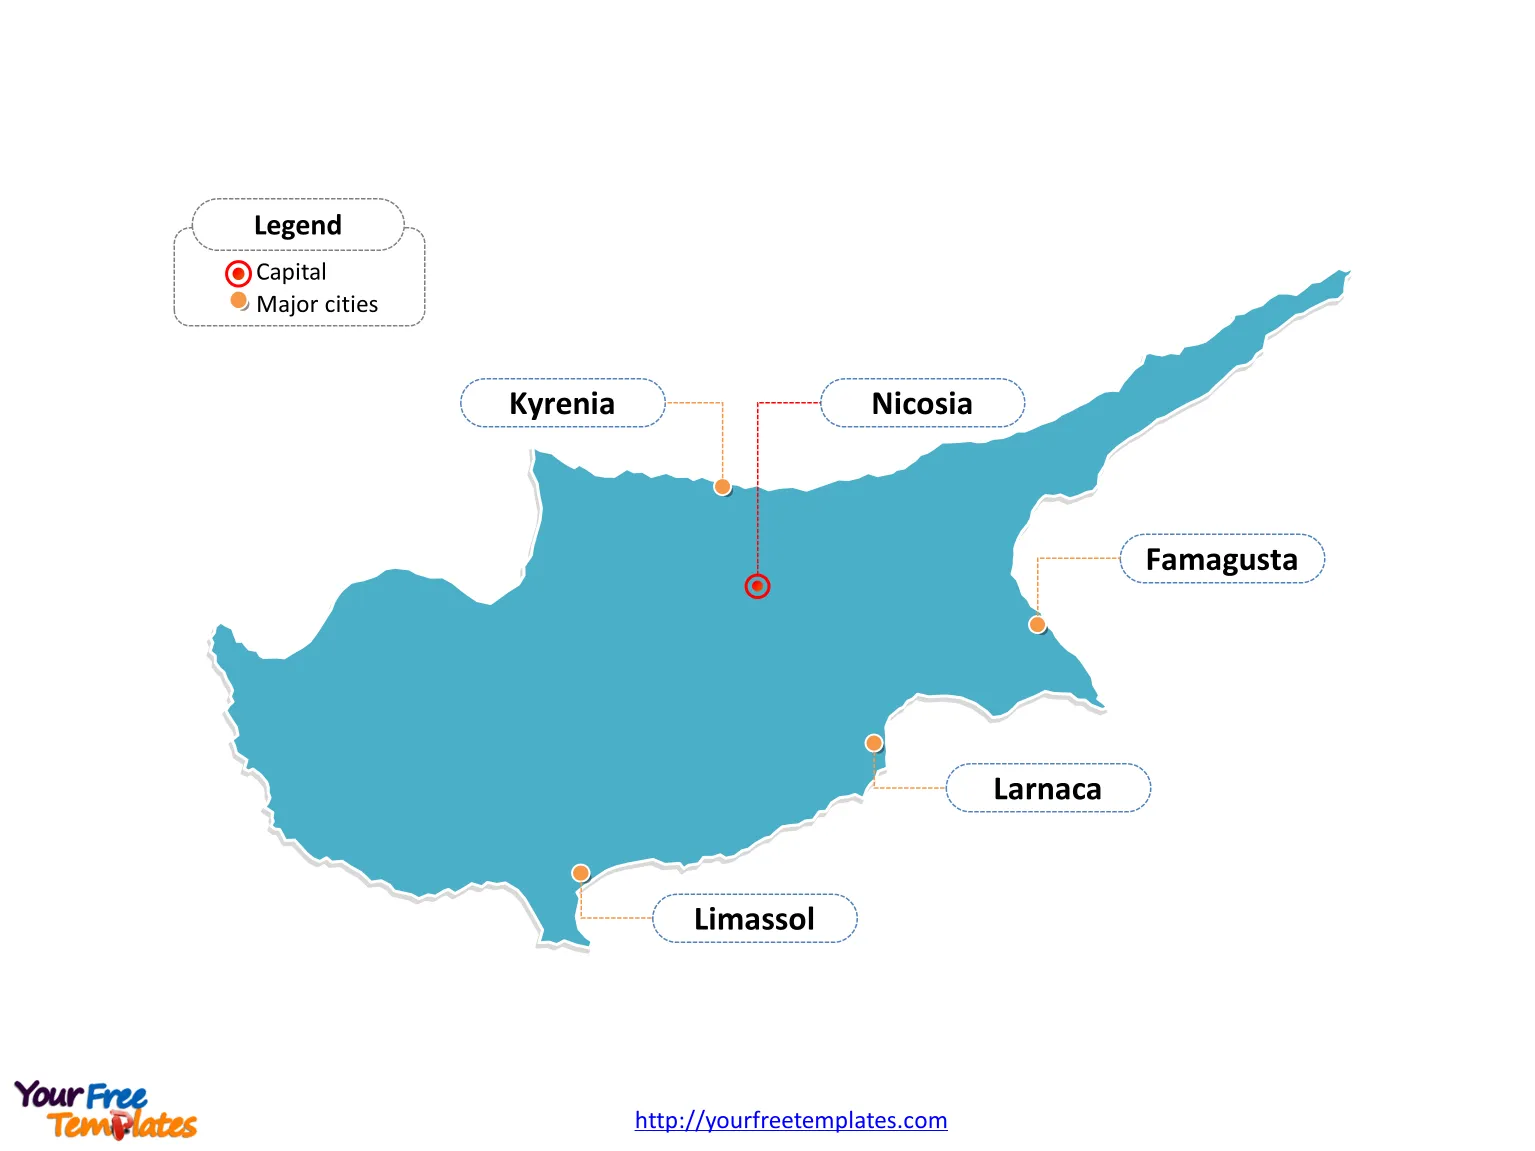 Cyprus Municipality map labeled with major districts